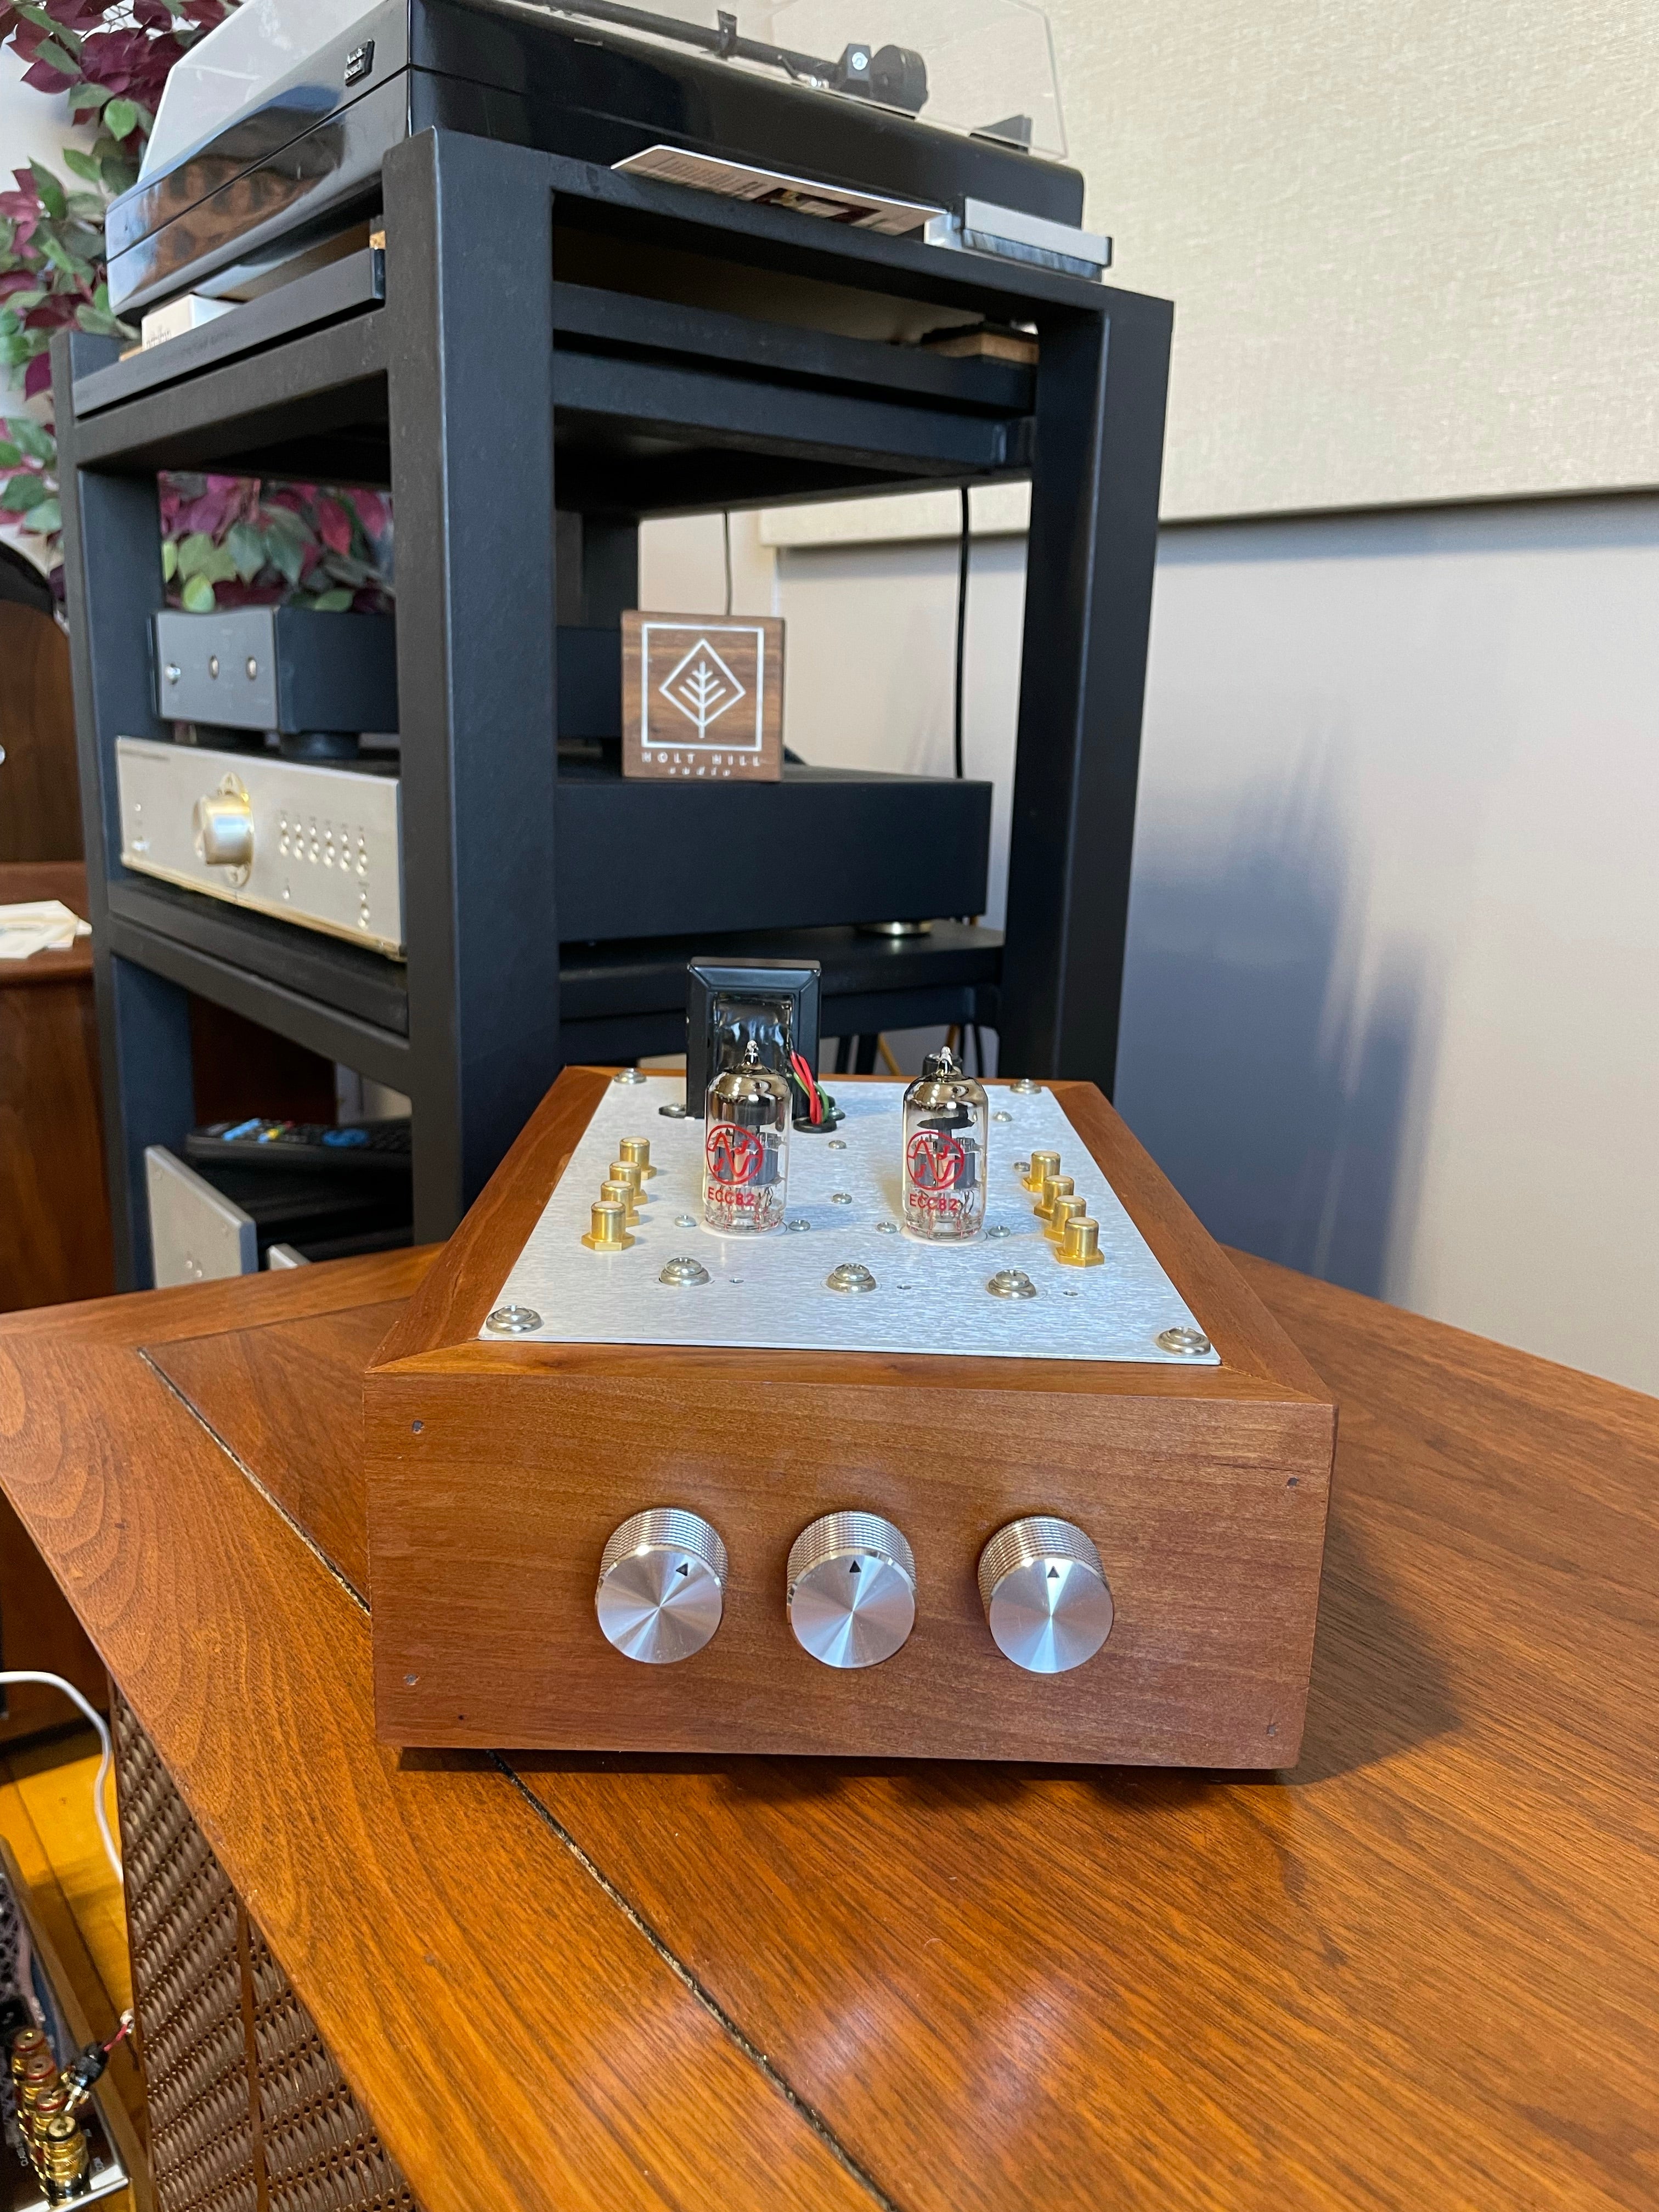 Bottlehead, "Foreplay" Tube Linestage - SOLD